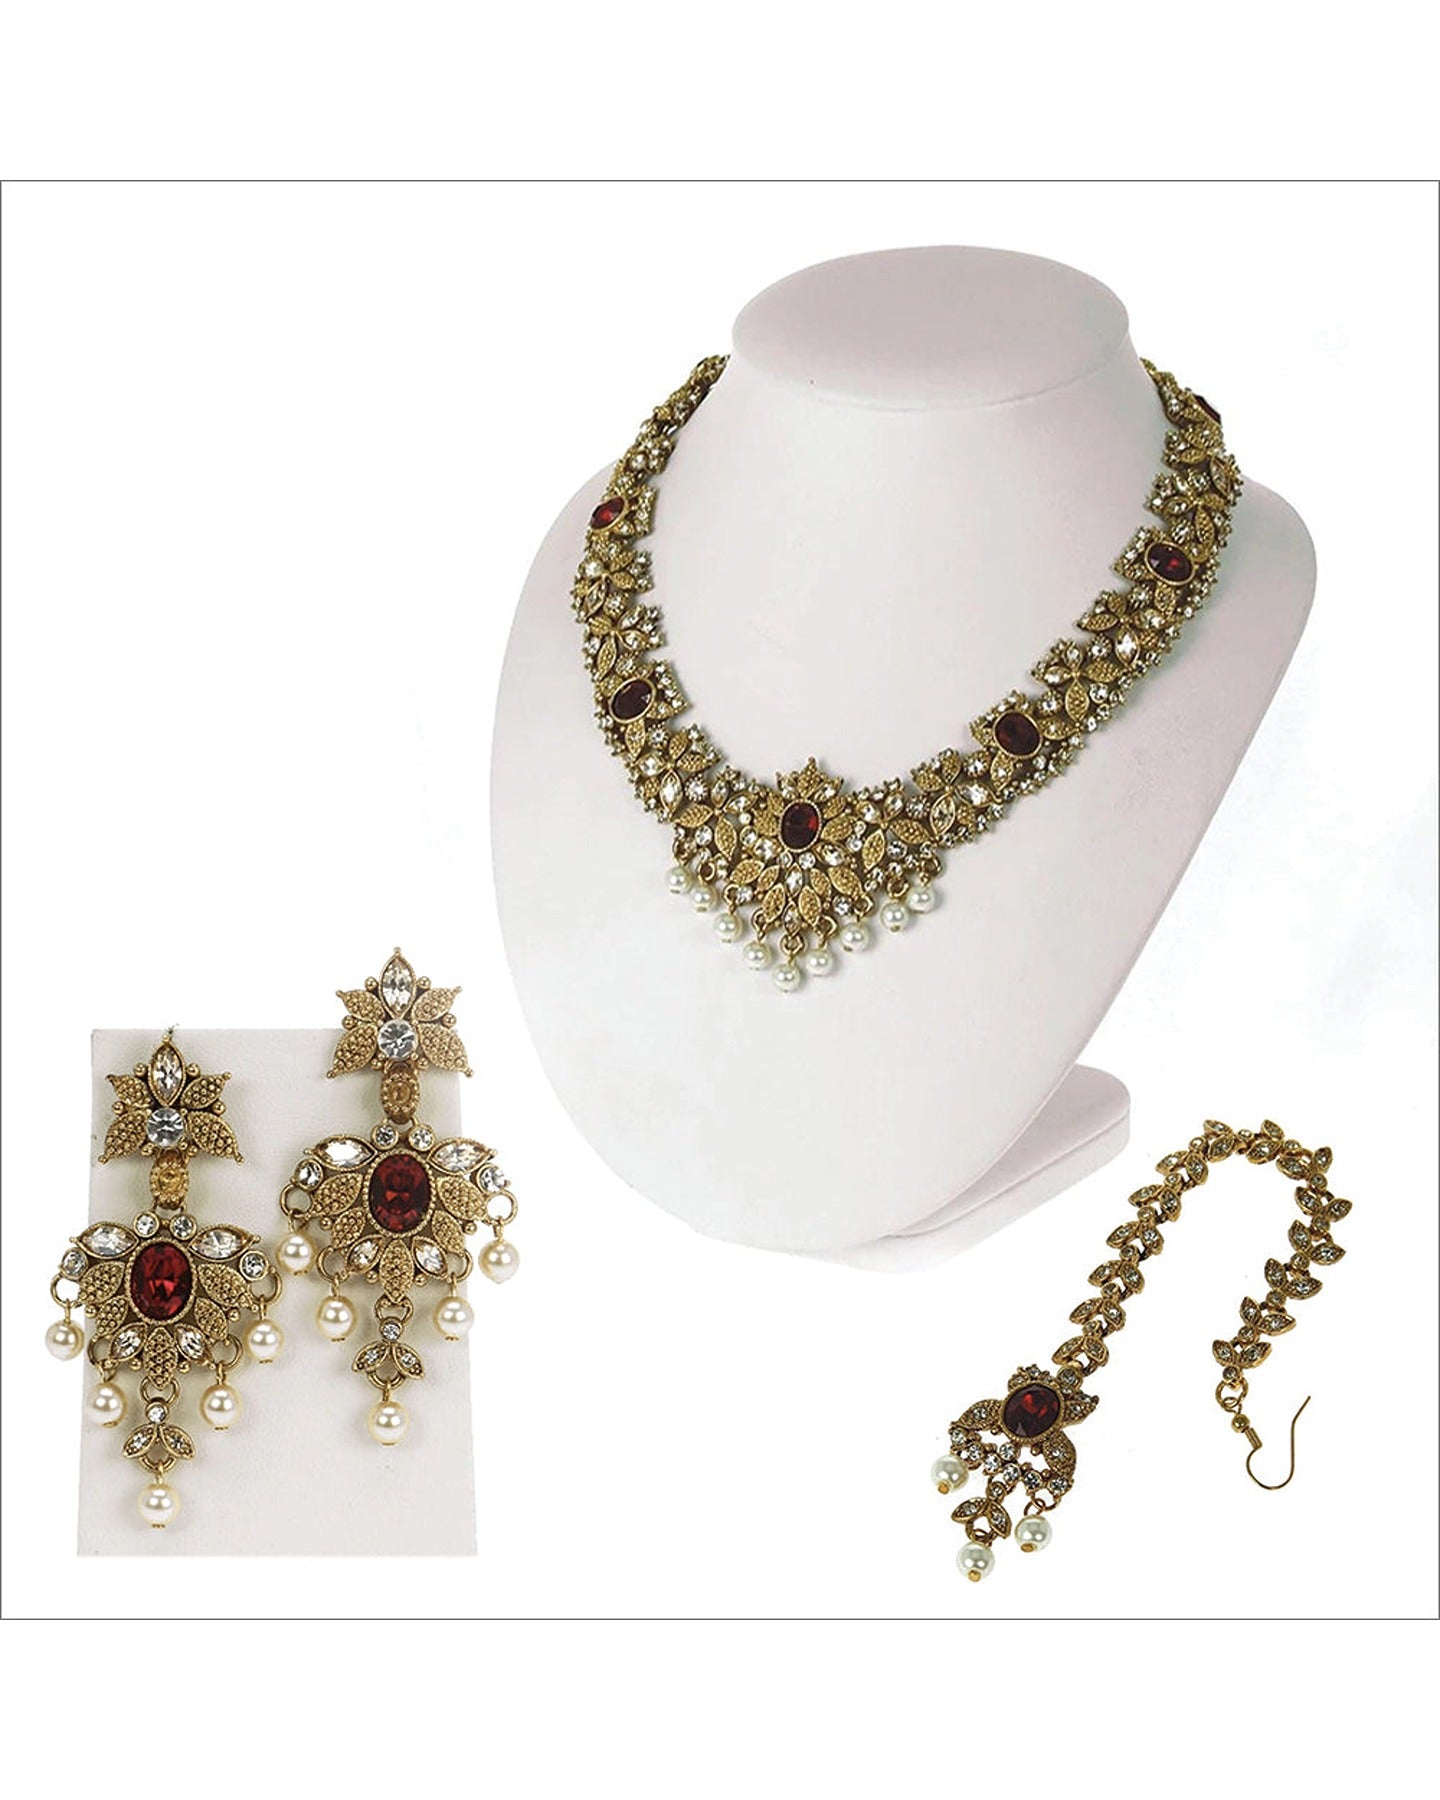 Antique Gold Jewelry with Siam Red and Crystal Golden Shadow Stones